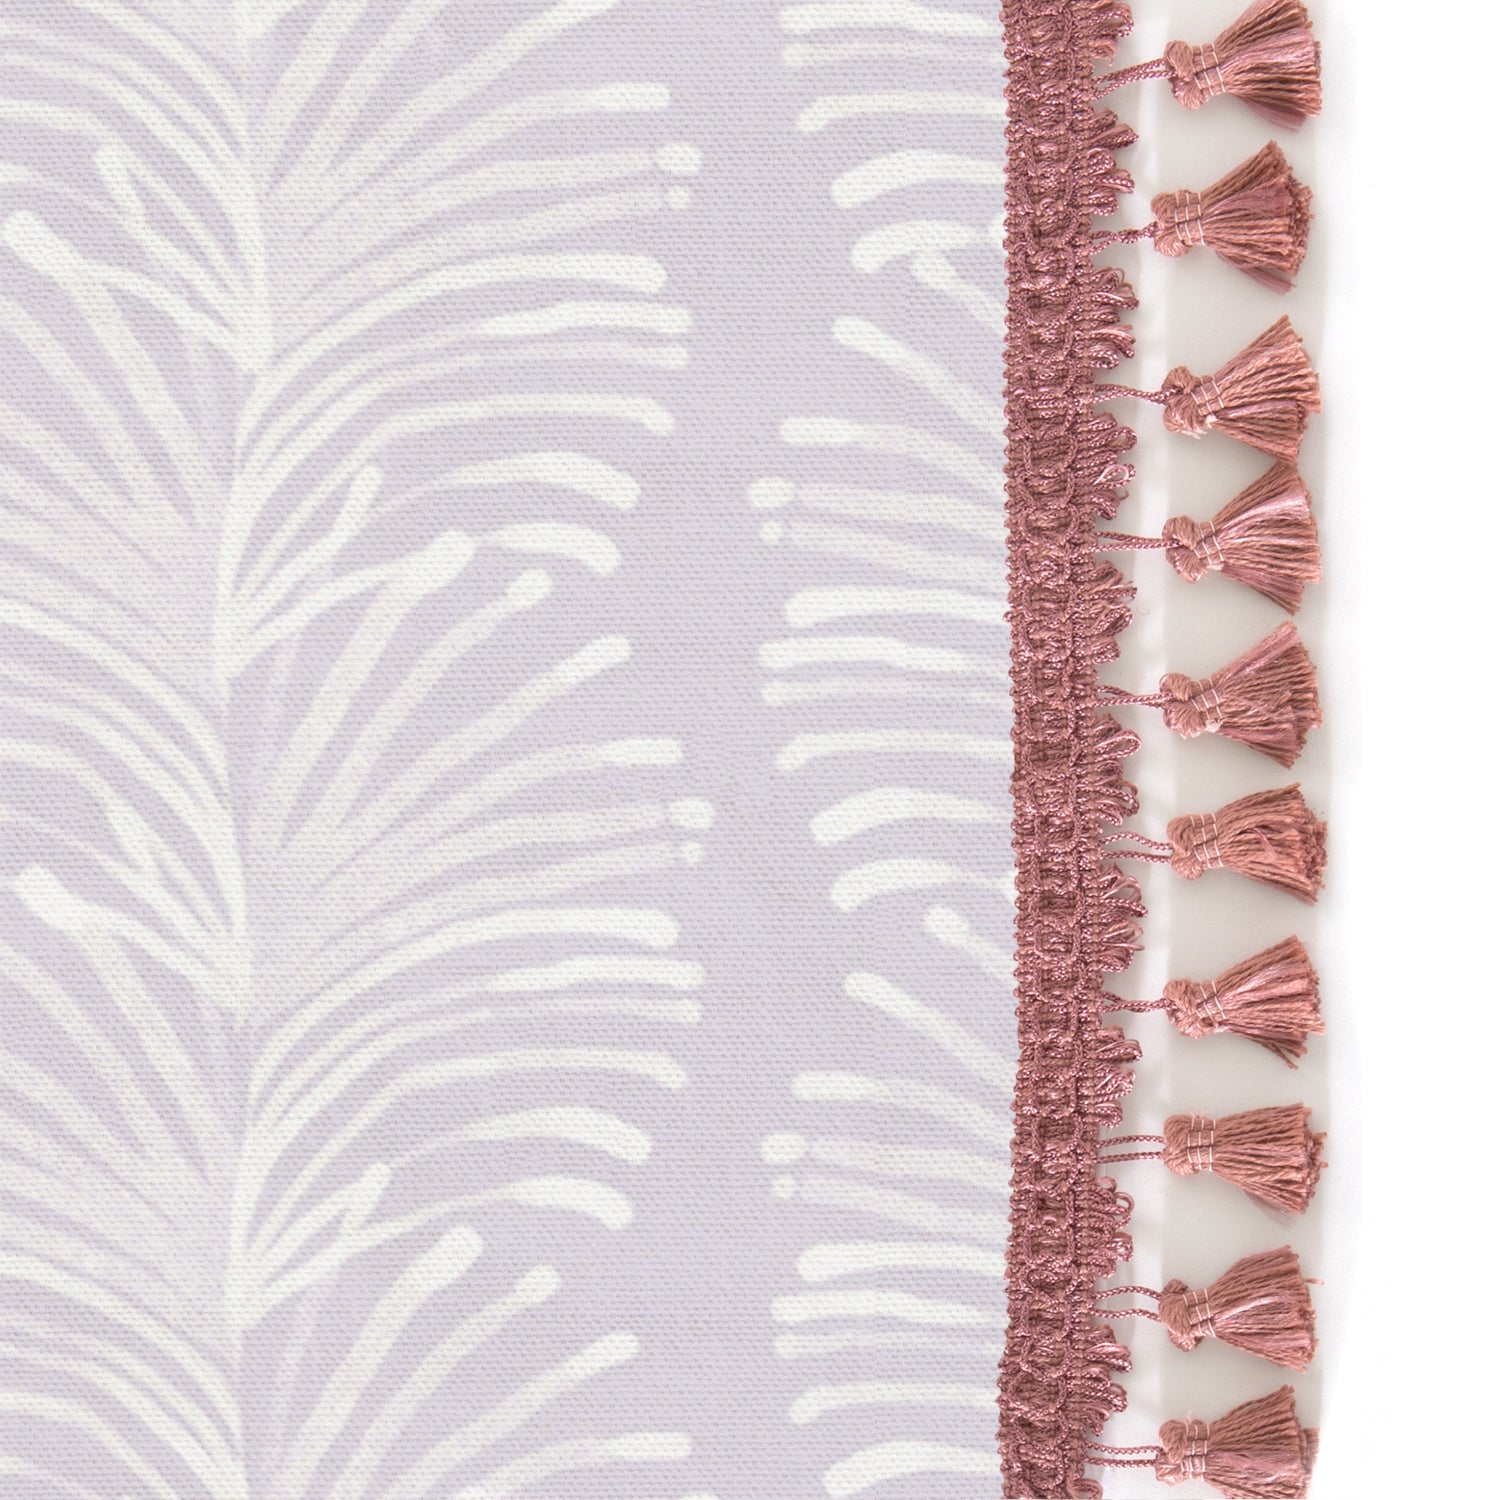 Upclose picture of Emma Lavender custom shower curtain with dusty rose tassel trim